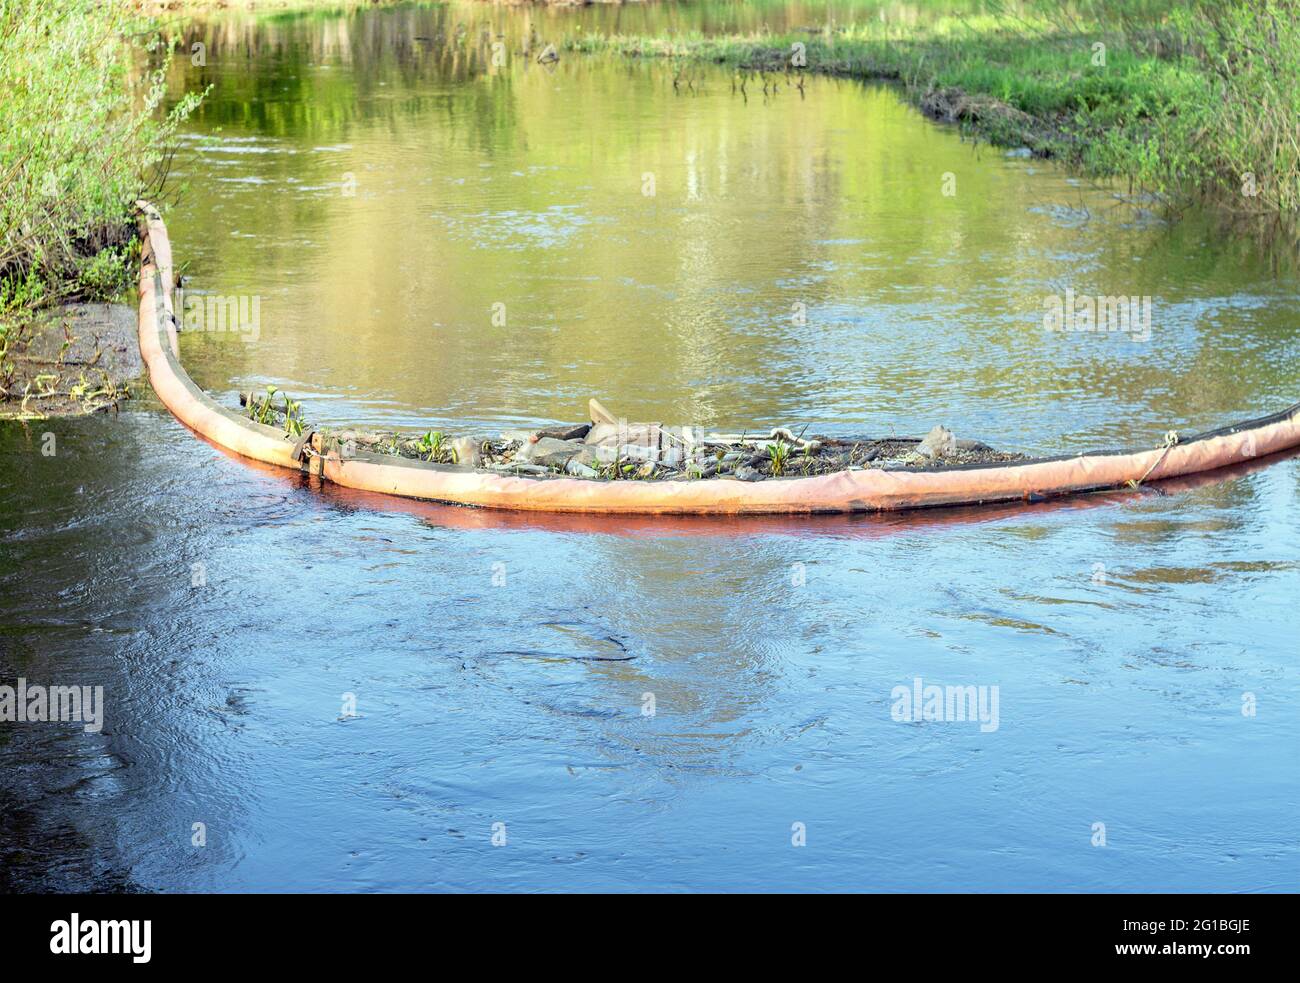 The floating barrier collects river waste to trap plastic bags, bottles, and other waste.Protection of rivers from garbage. Stock Photo